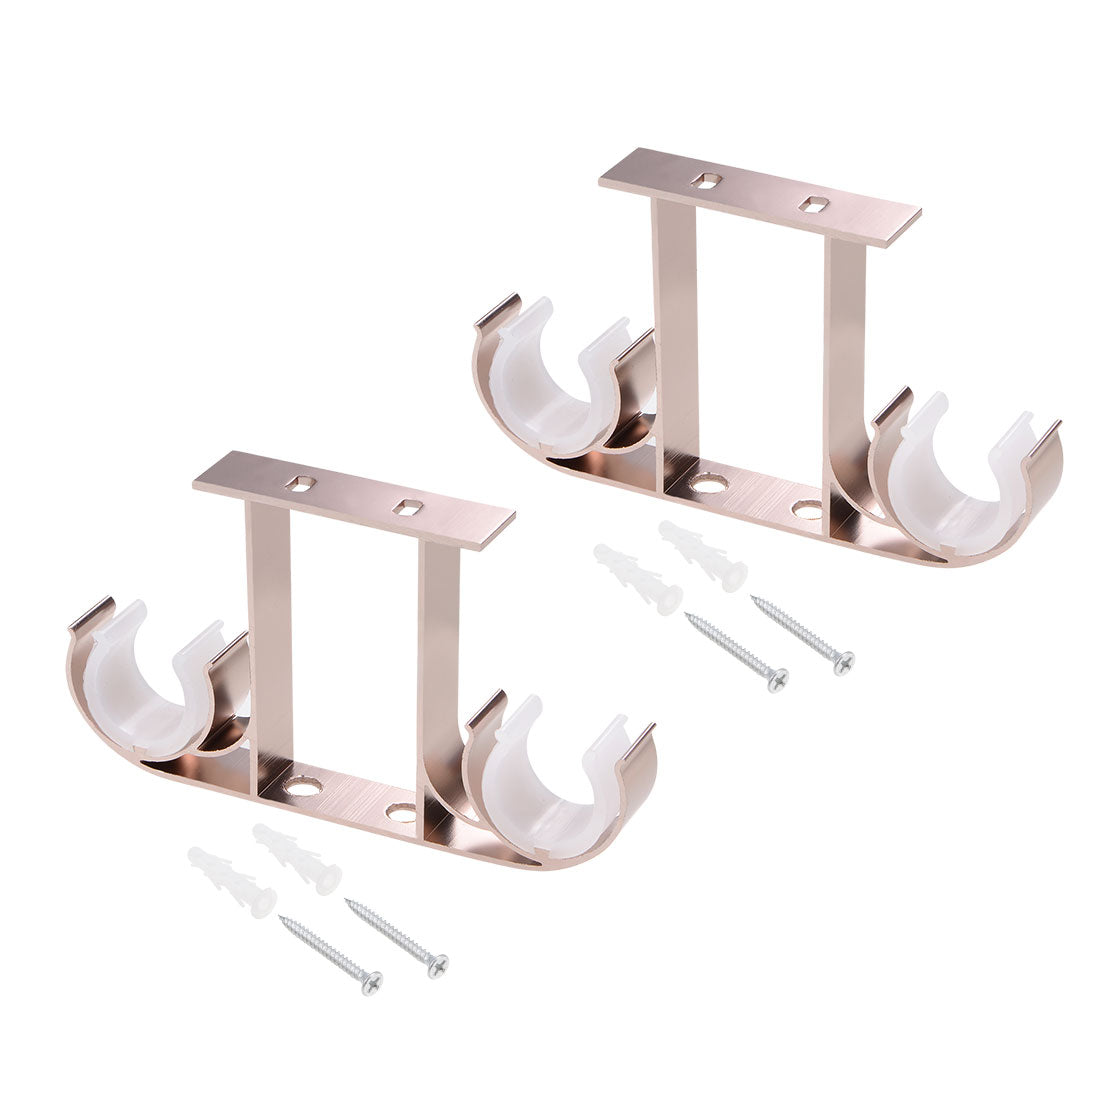 uxcell Uxcell Curtain Rod Bracket Aluminum Alloy Double Holder Support for 24mm Drapery Rod, 141 x 80 x 19mm Rose Gold 4Pcs